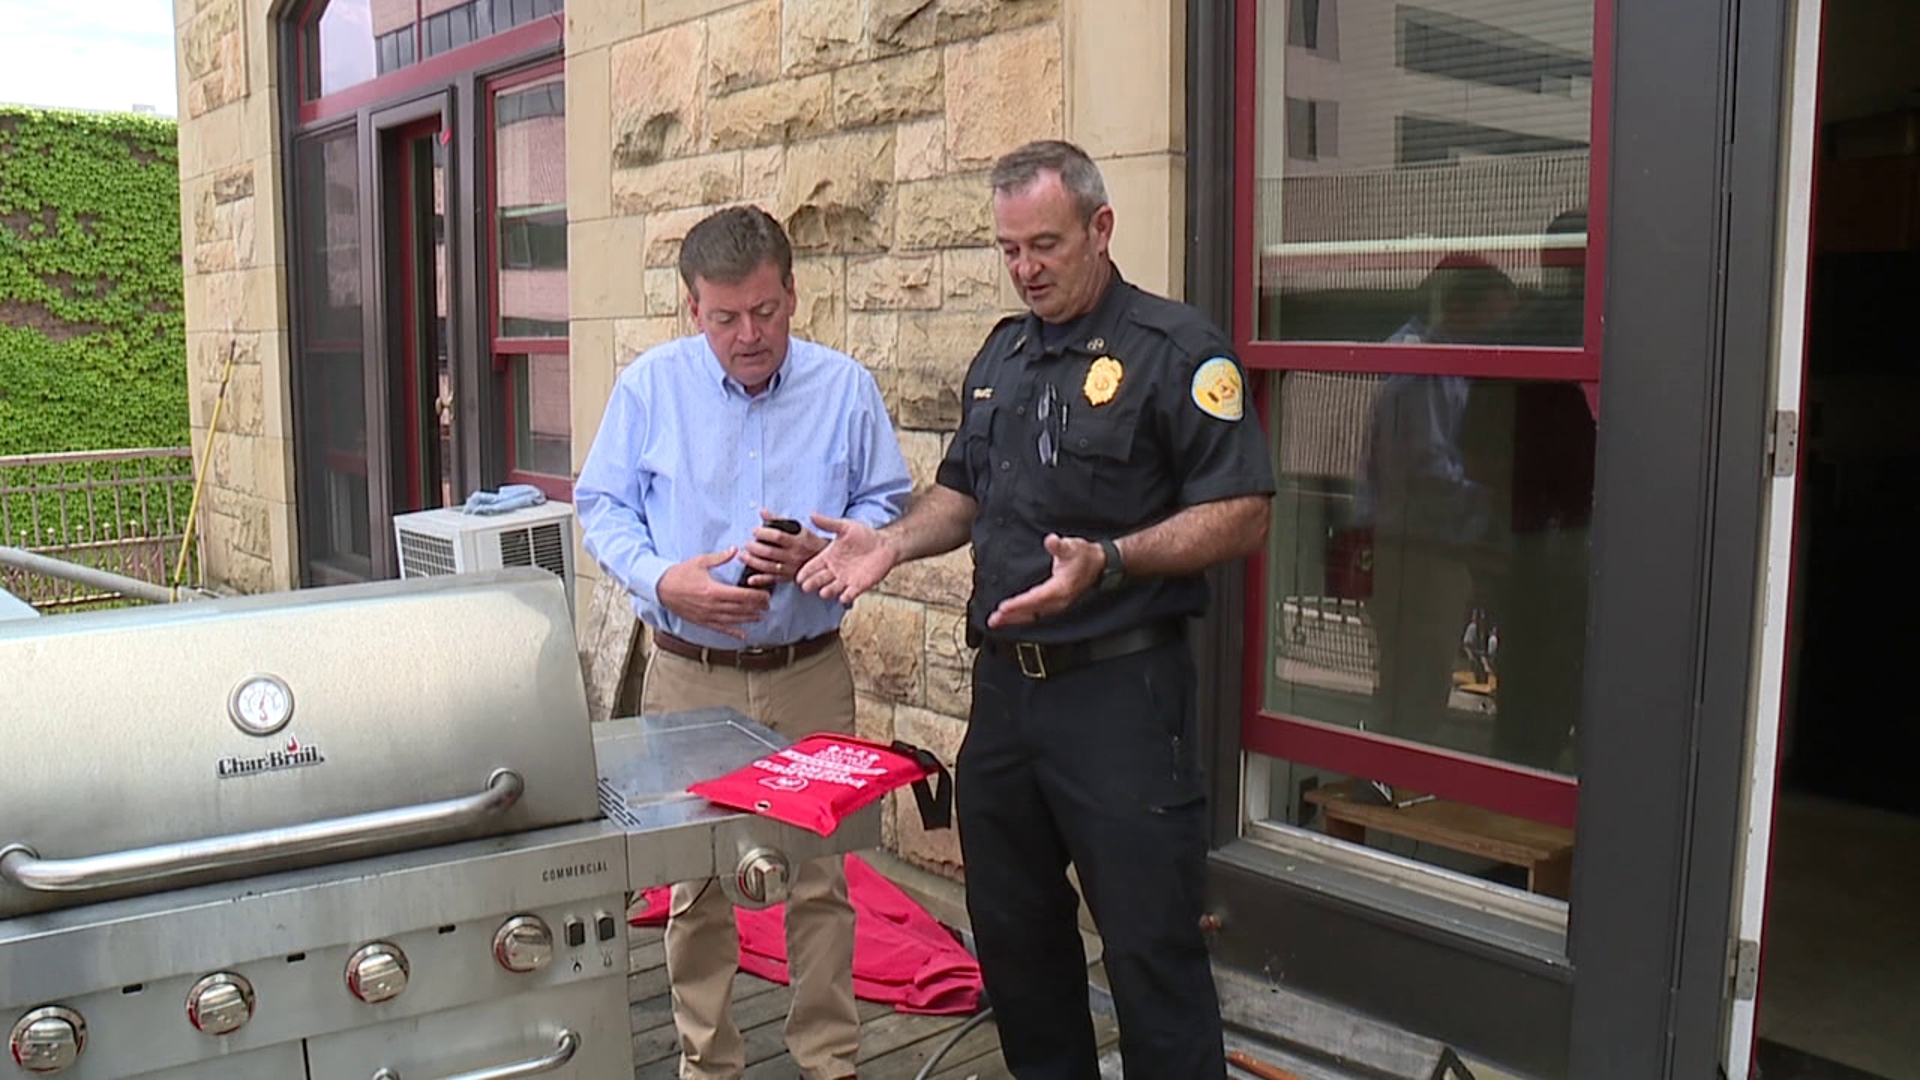 Summertime brings its own hazards, grill fires being one of them. Kurt tests a product that makers say can stifle any small fire.